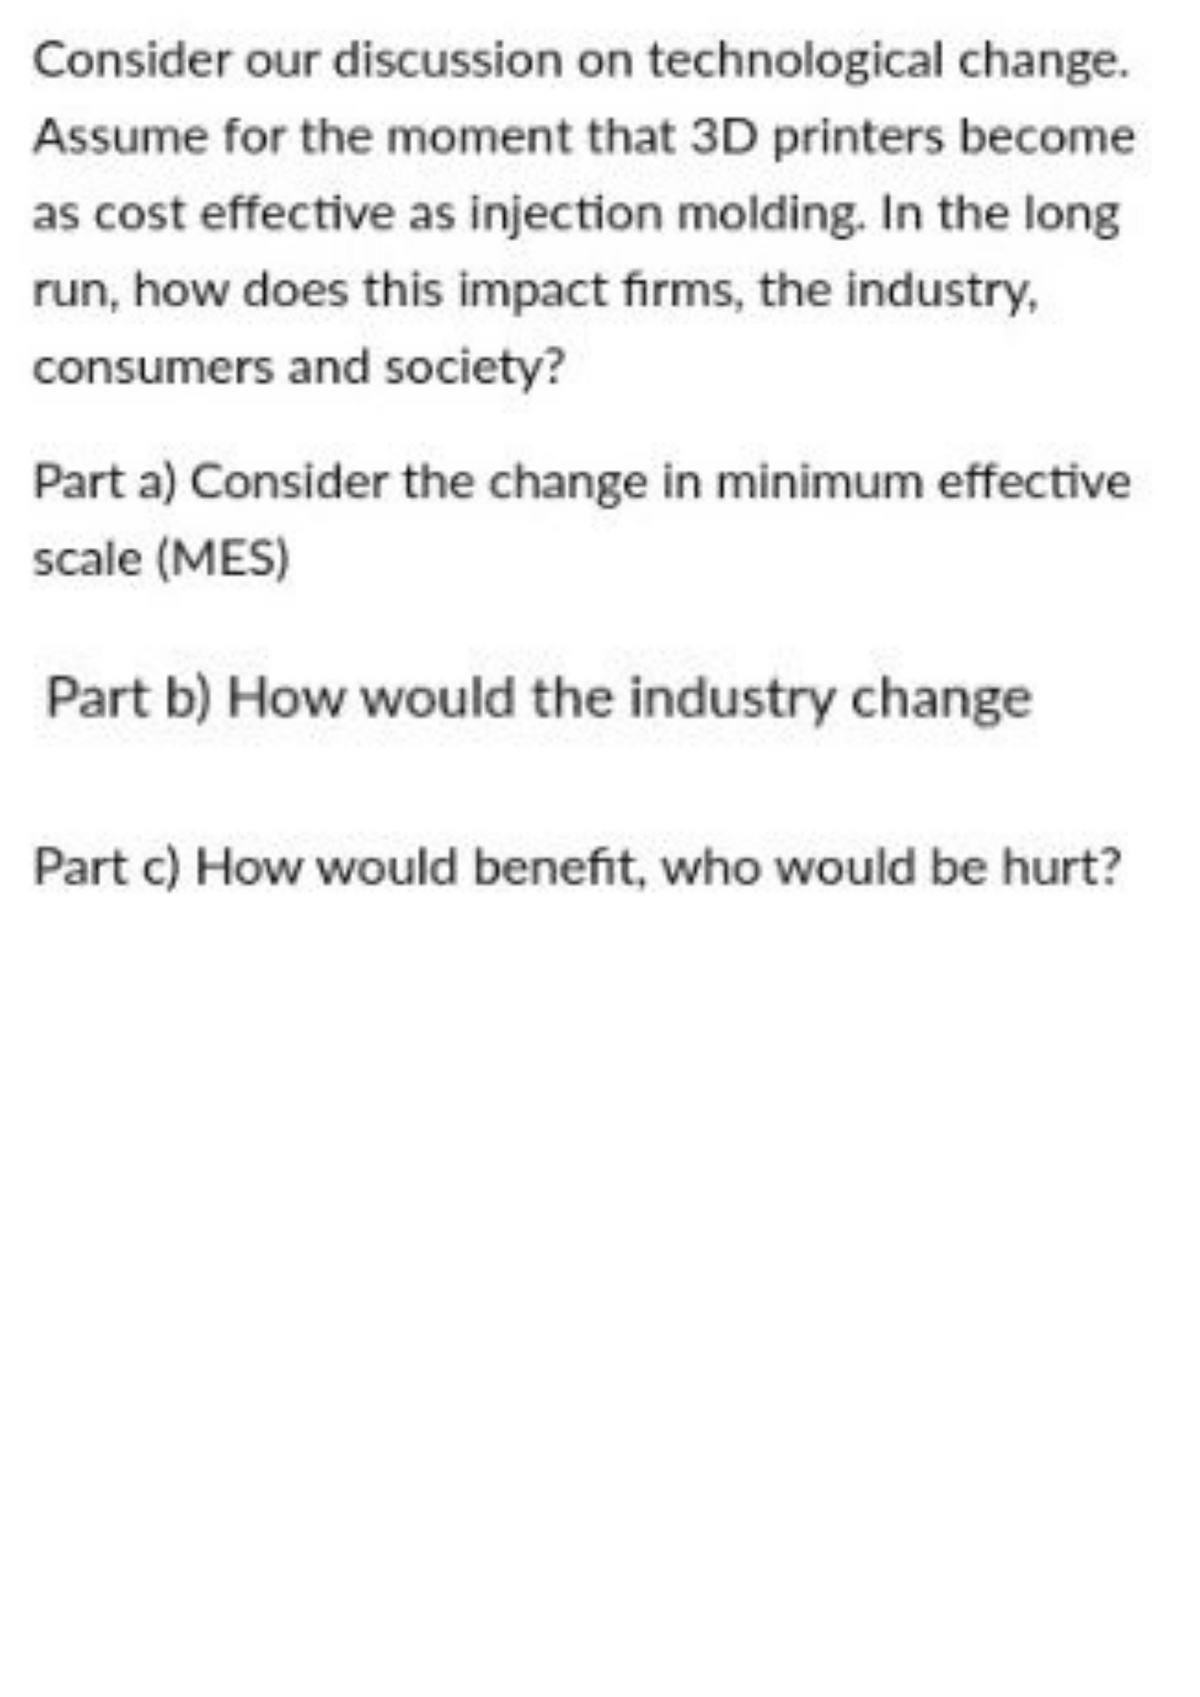 Consider our discussion on technological change.
Assume for the moment that 3D printers become
as cost effective as injection molding. In the long
run, how does this impact firms, the industry,
consumers and society?
Part a) Consider the change in minimum effective
scale (MES)
Part b) How would the industry change
Part c) How would benefit, who would be hurt?